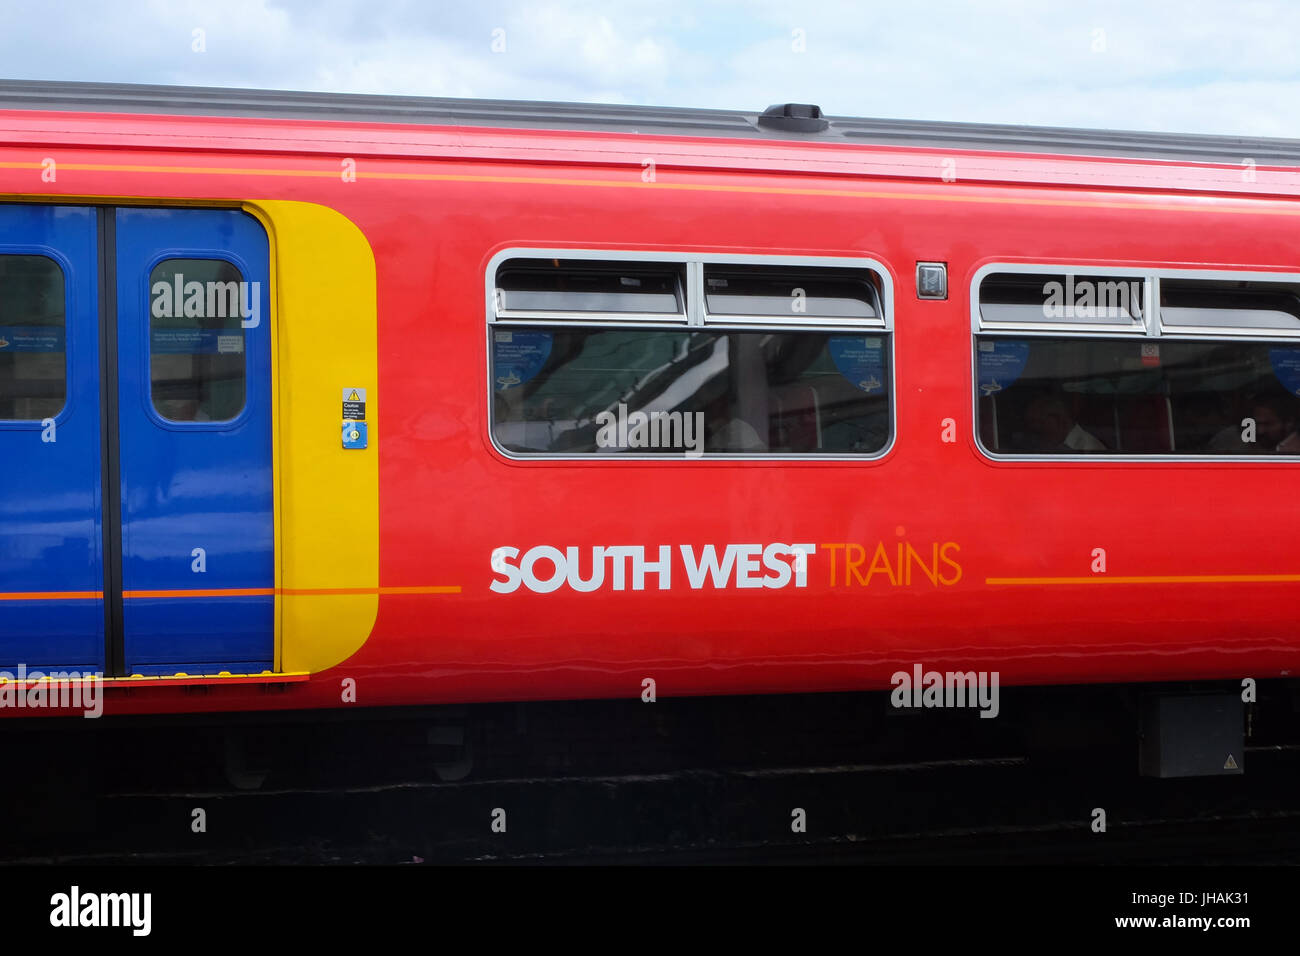 A South West train carriage in England. Stock Photo